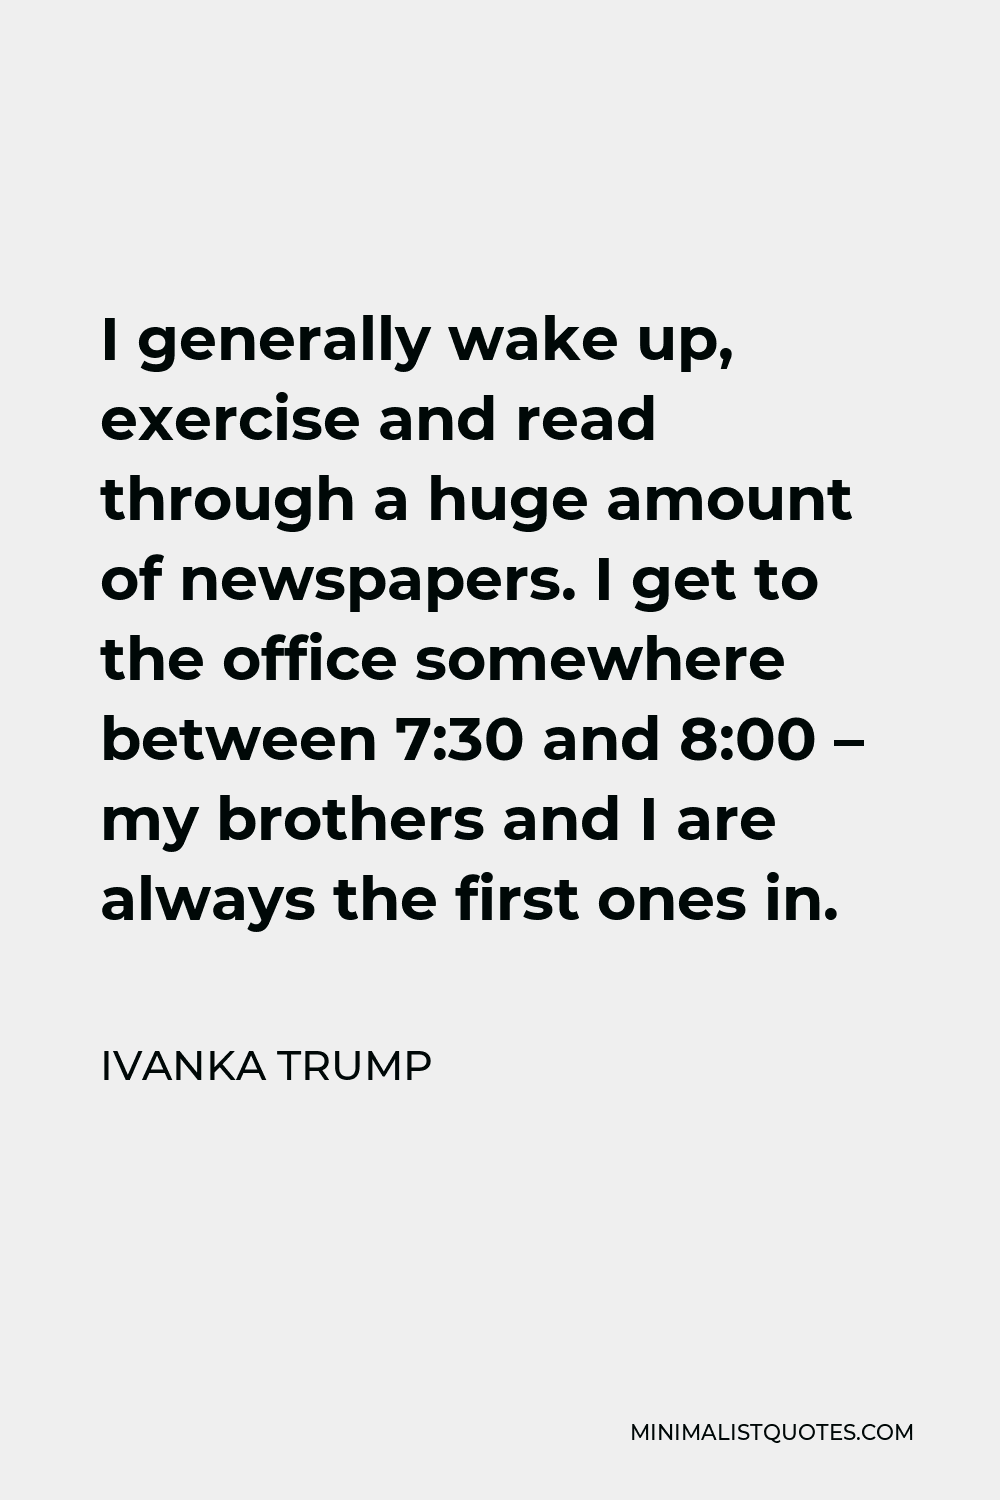 Ivanka Trump Quote - I generally wake up, exercise and read through a huge amount of newspapers. I get to the office somewhere between 7:30 and 8:00 – my brothers and I are always the first ones in.